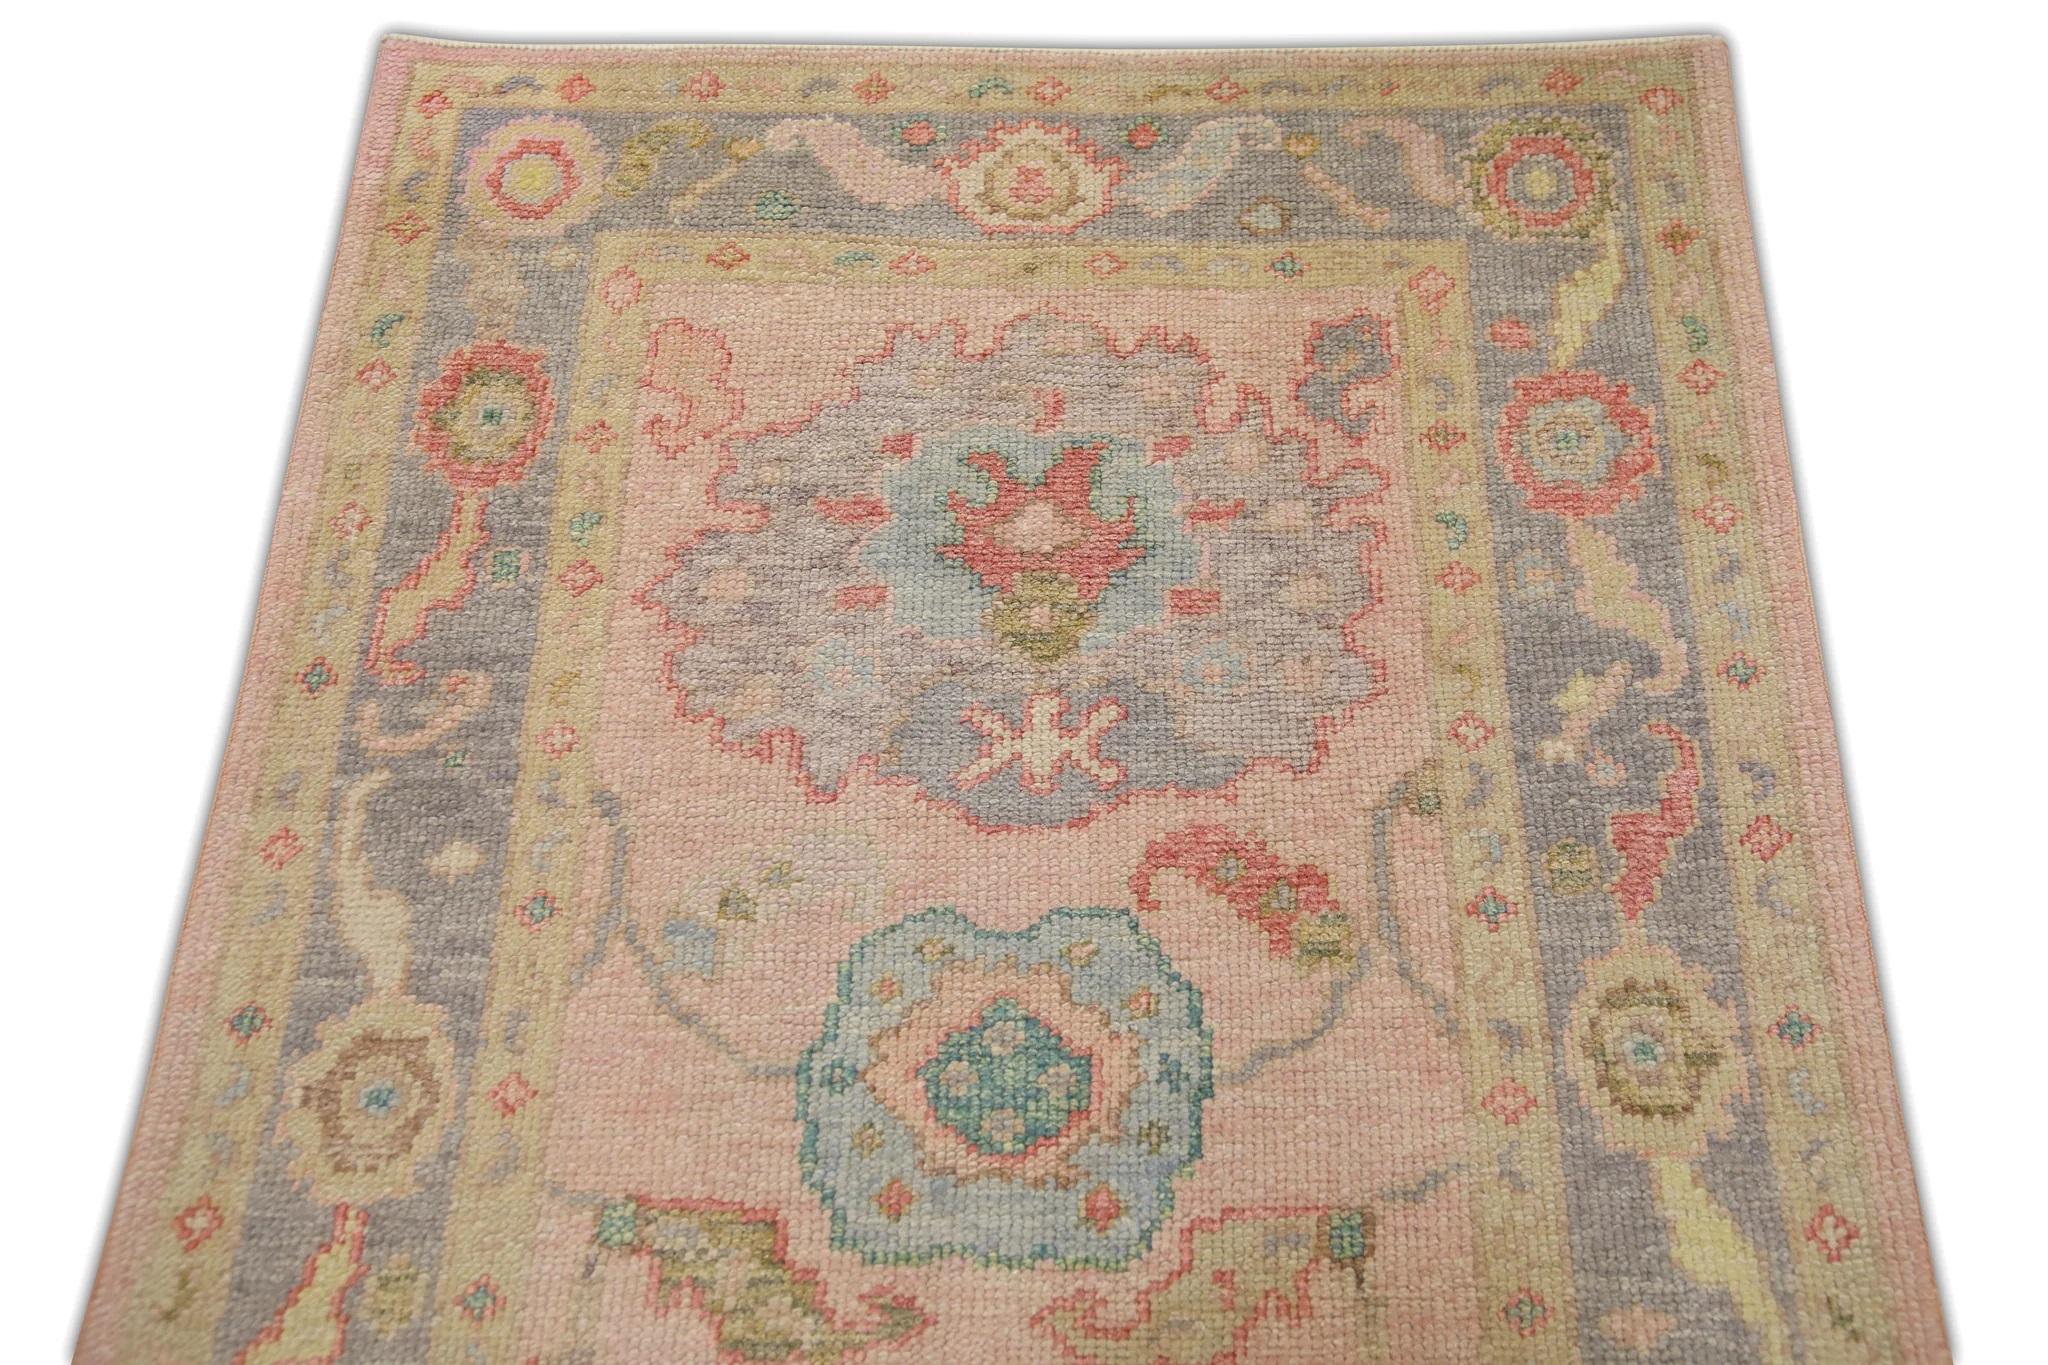 Vegetable Dyed Pink and Purple Floral Handwoven Wool Turkish Oushak Rug 3'1